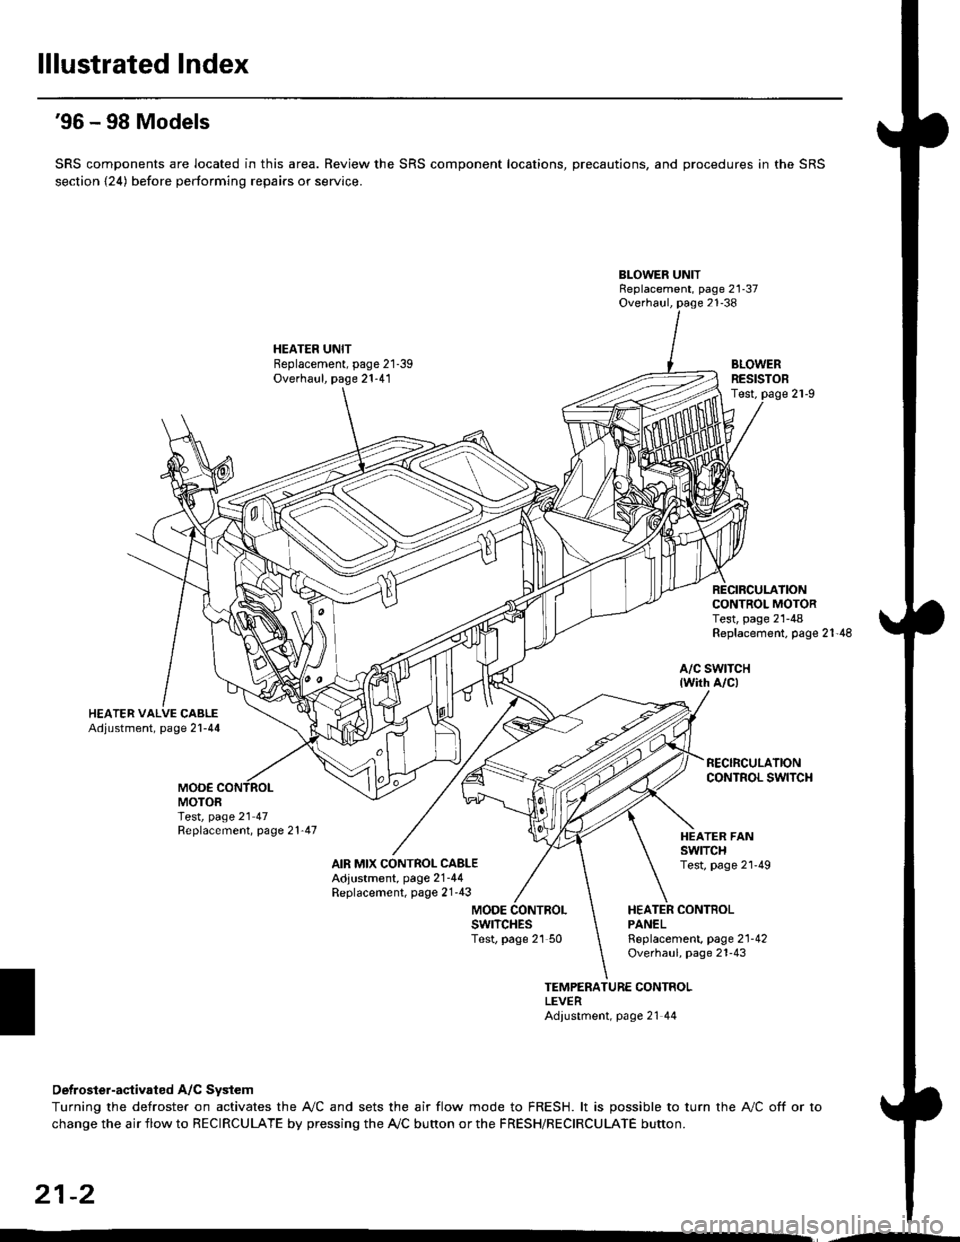 HONDA CIVIC 1998 6.G Workshop Manual lllustrated Index
96 - 98 Models
SRS components are located in this area. Review the SRS component locations, precautions, and procedures in the SRS
section {24) before performing repairs or service.